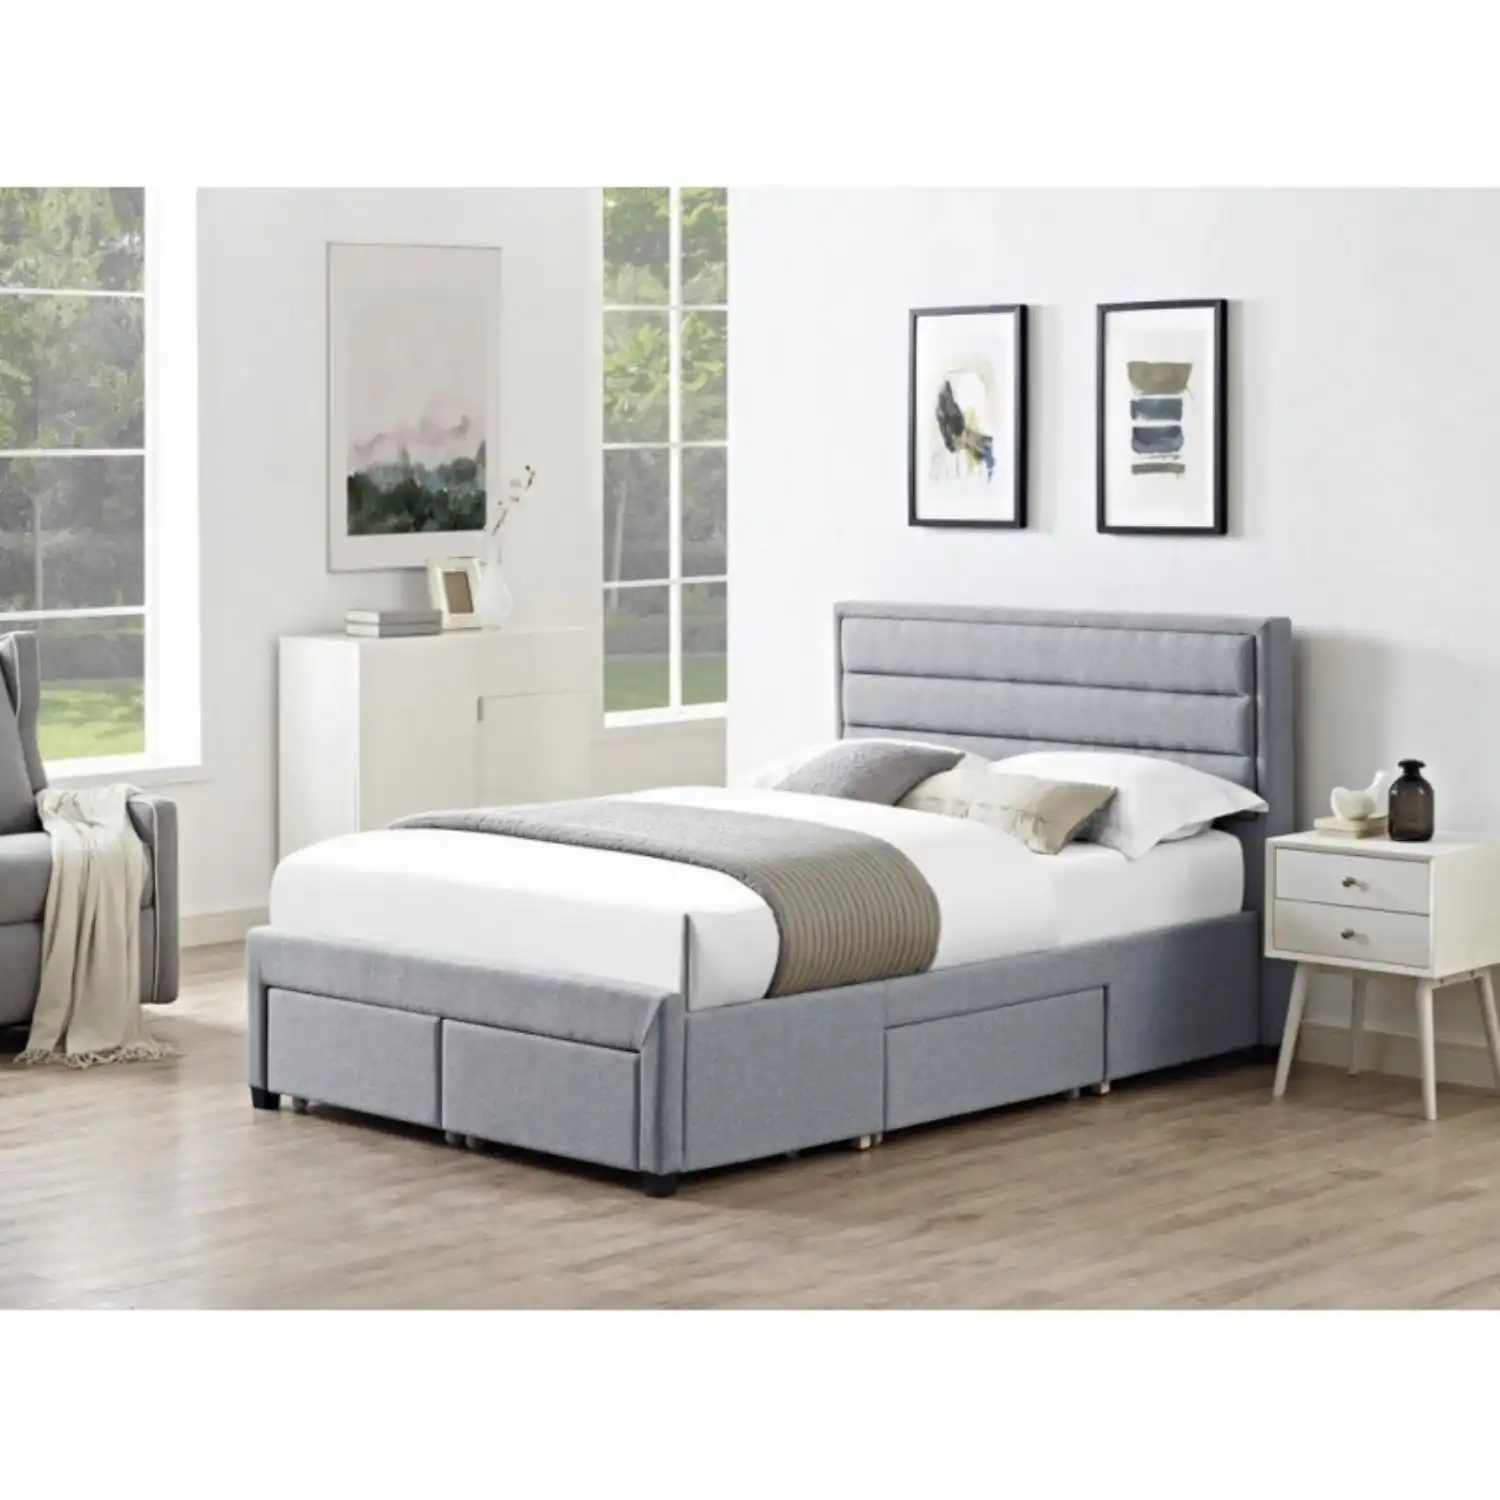 Parsley 4 Drawer Grey Fabric Bed